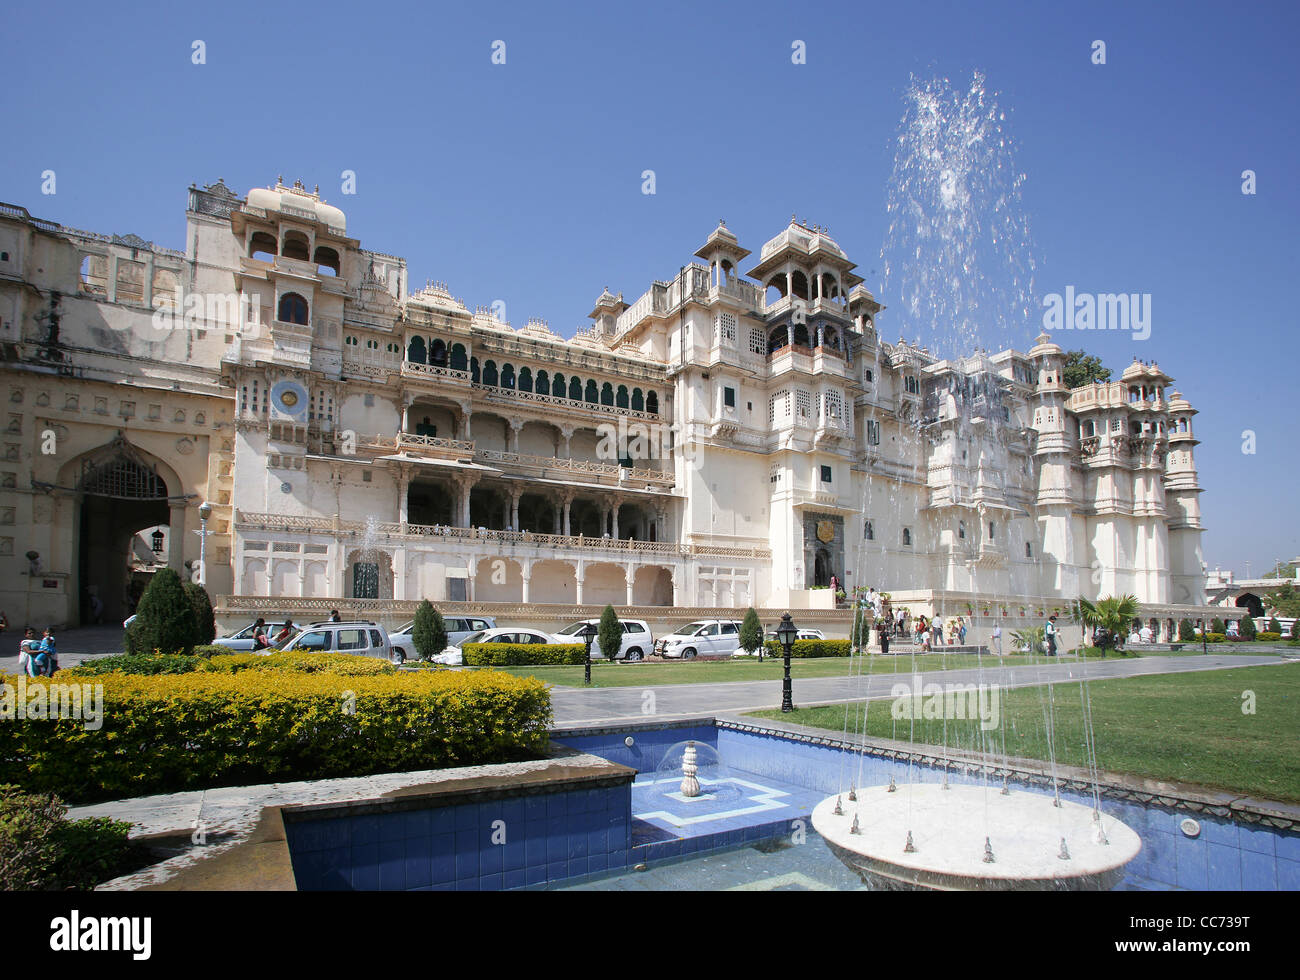 View of the City Palace of Udaipur, home of the Maharaja of Udaipur, a museum and a luxury hotel, Rajasthan, India Stock Photo